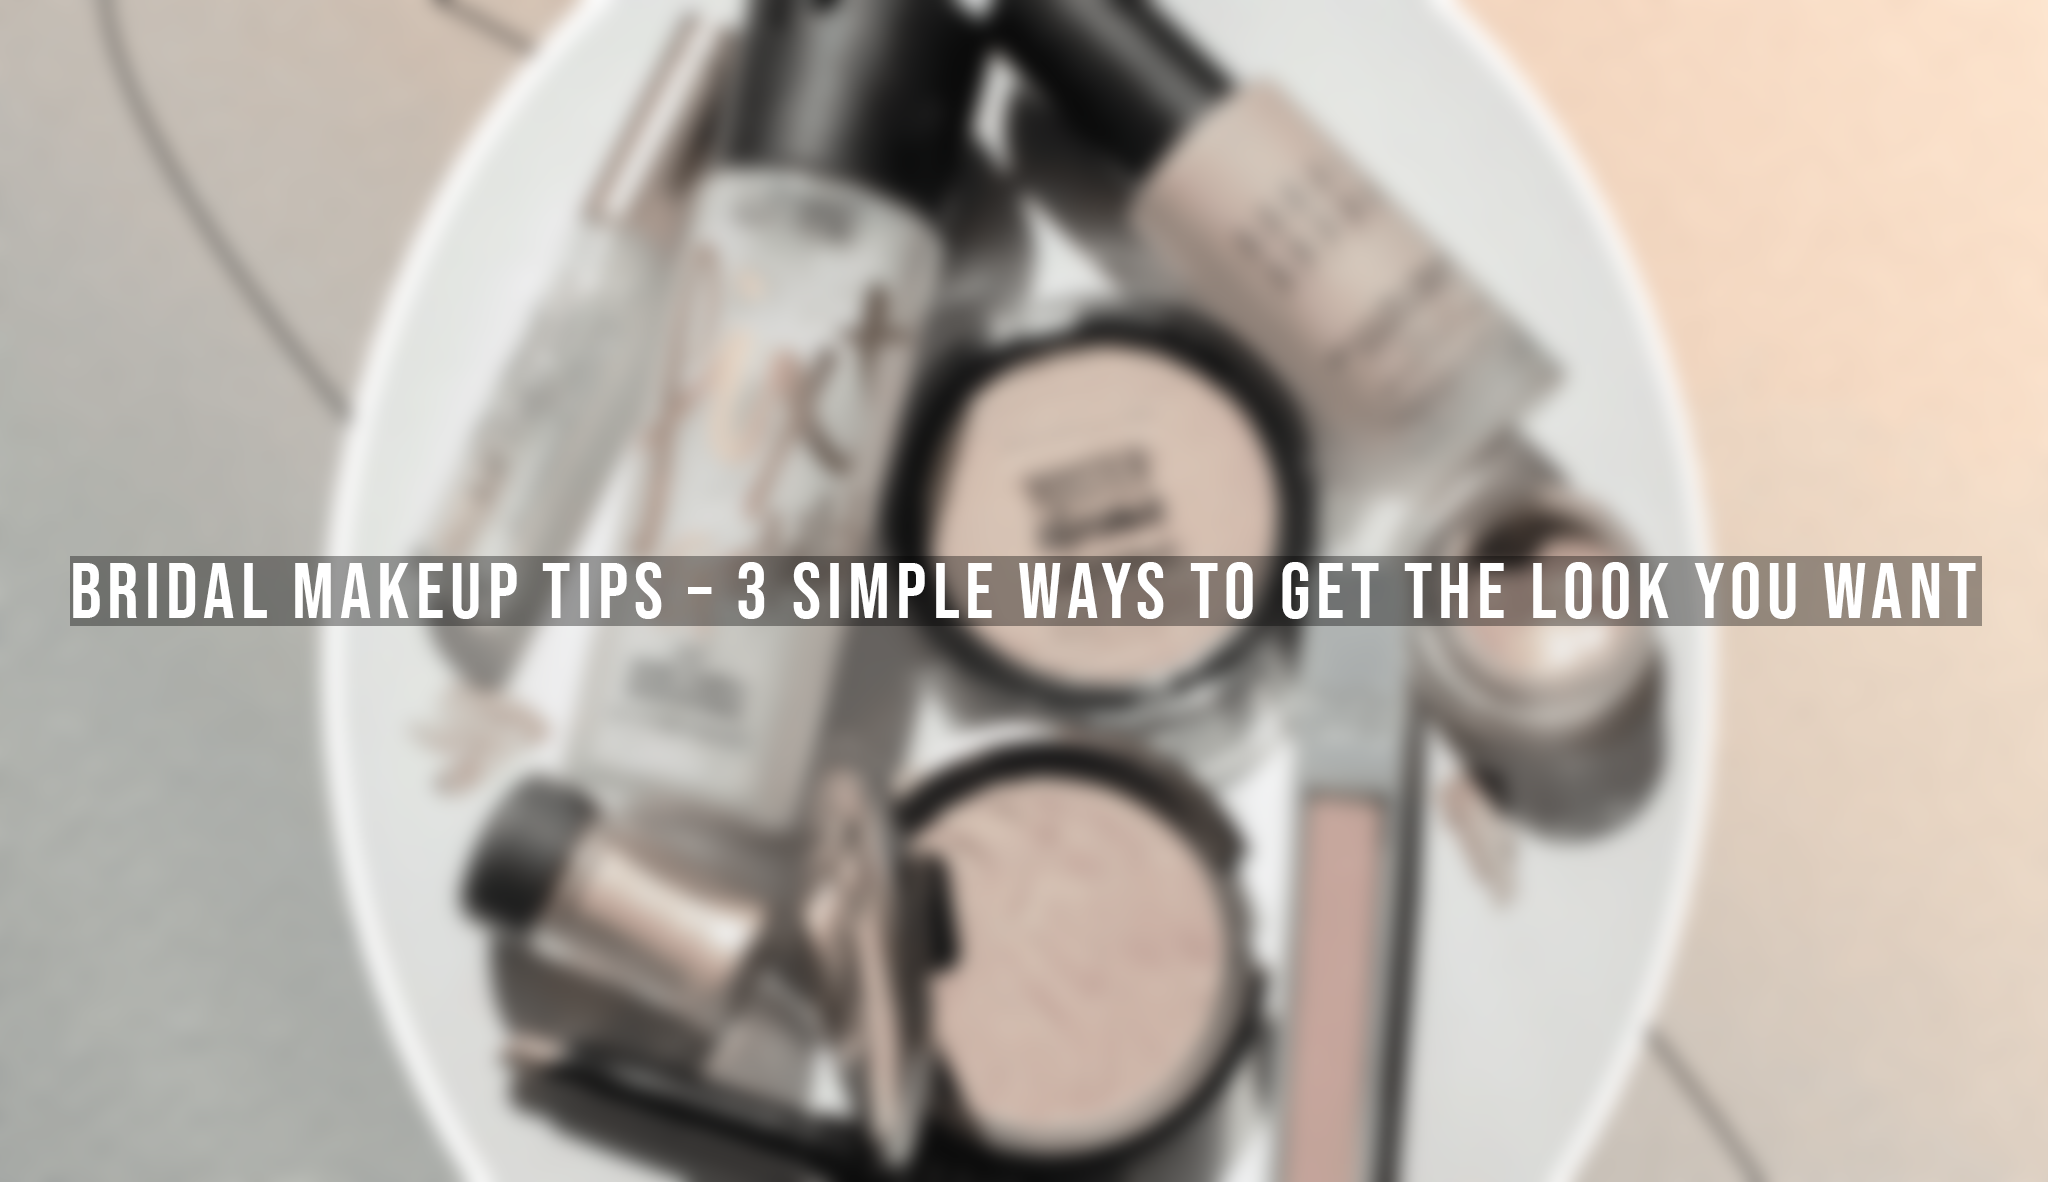 Bridal Makeup Tips - 3 Simple Ways to Get the Look You Want